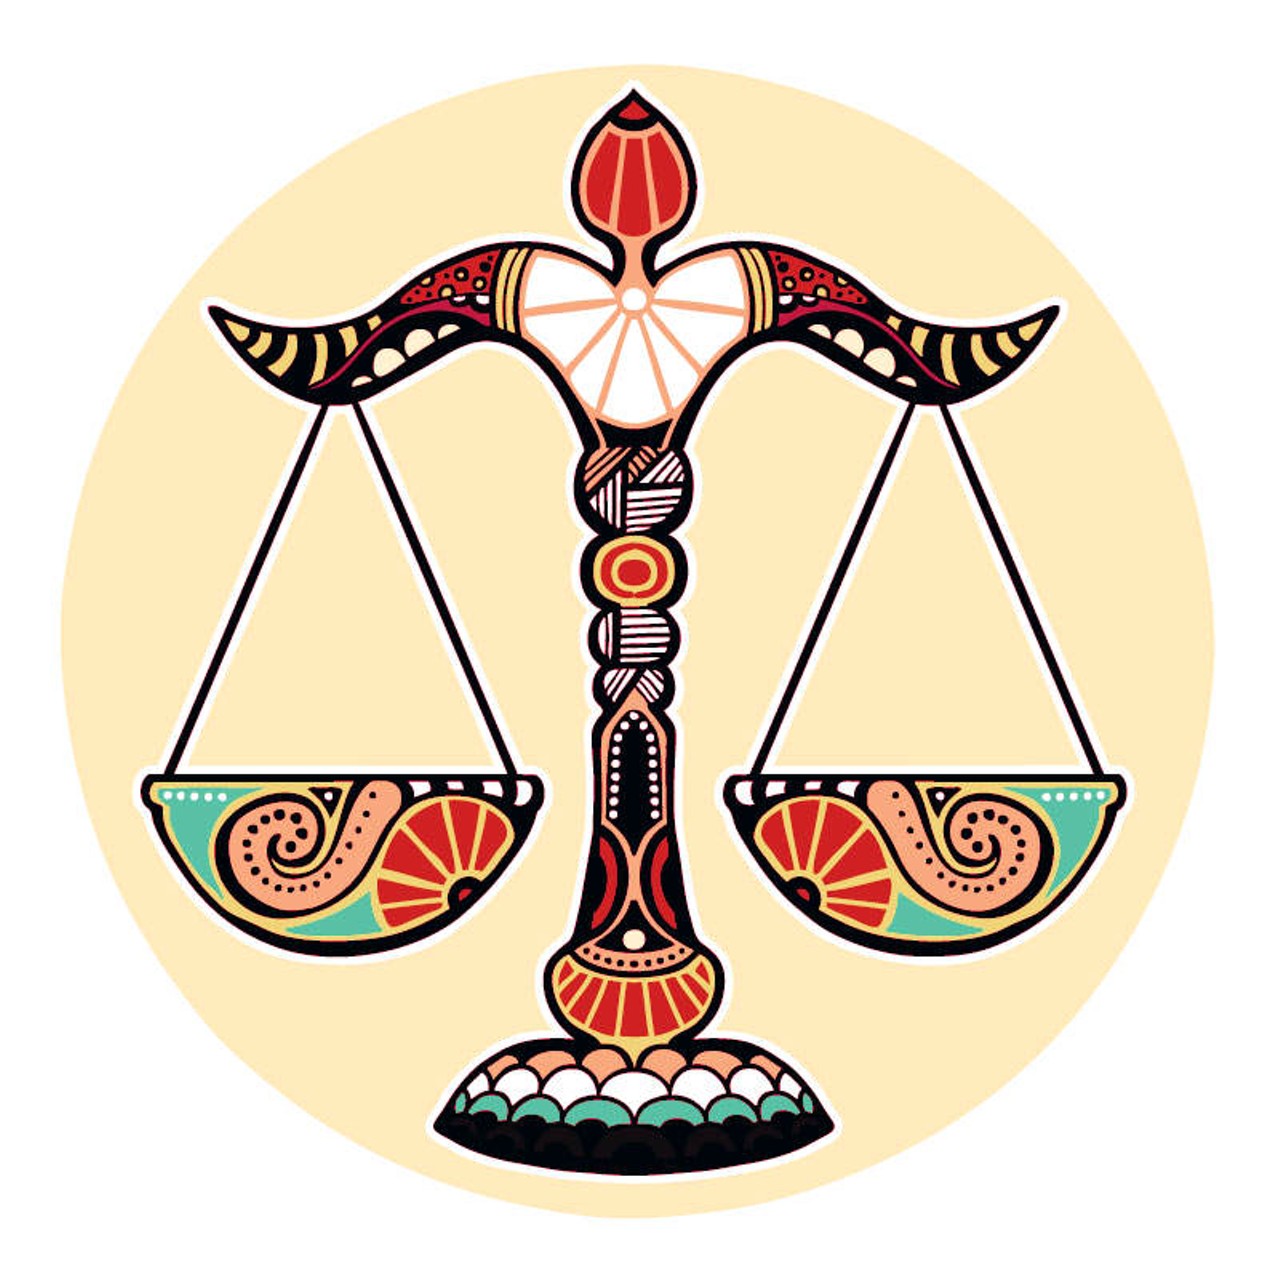 LIBRA (Sept. 21-Oct. 20): 
You&#146;re wondering if you&#146;ve painted yourself into a corner. Sometimes there&#146;s no other choice. Of late it has been costing you way too much to get involved with other people. In and around that, the money piece is huge. So is the idea that you&#146;re about to make it or break it. God knows how the rest of the story will play out. The next few months will see you getting through a rough patch with more support from the invisible realms than you&#146;ve had in a long time. As far as this sense of estrangement goes? Don&#146;t expect it to last any longer than it takes you to reach out.